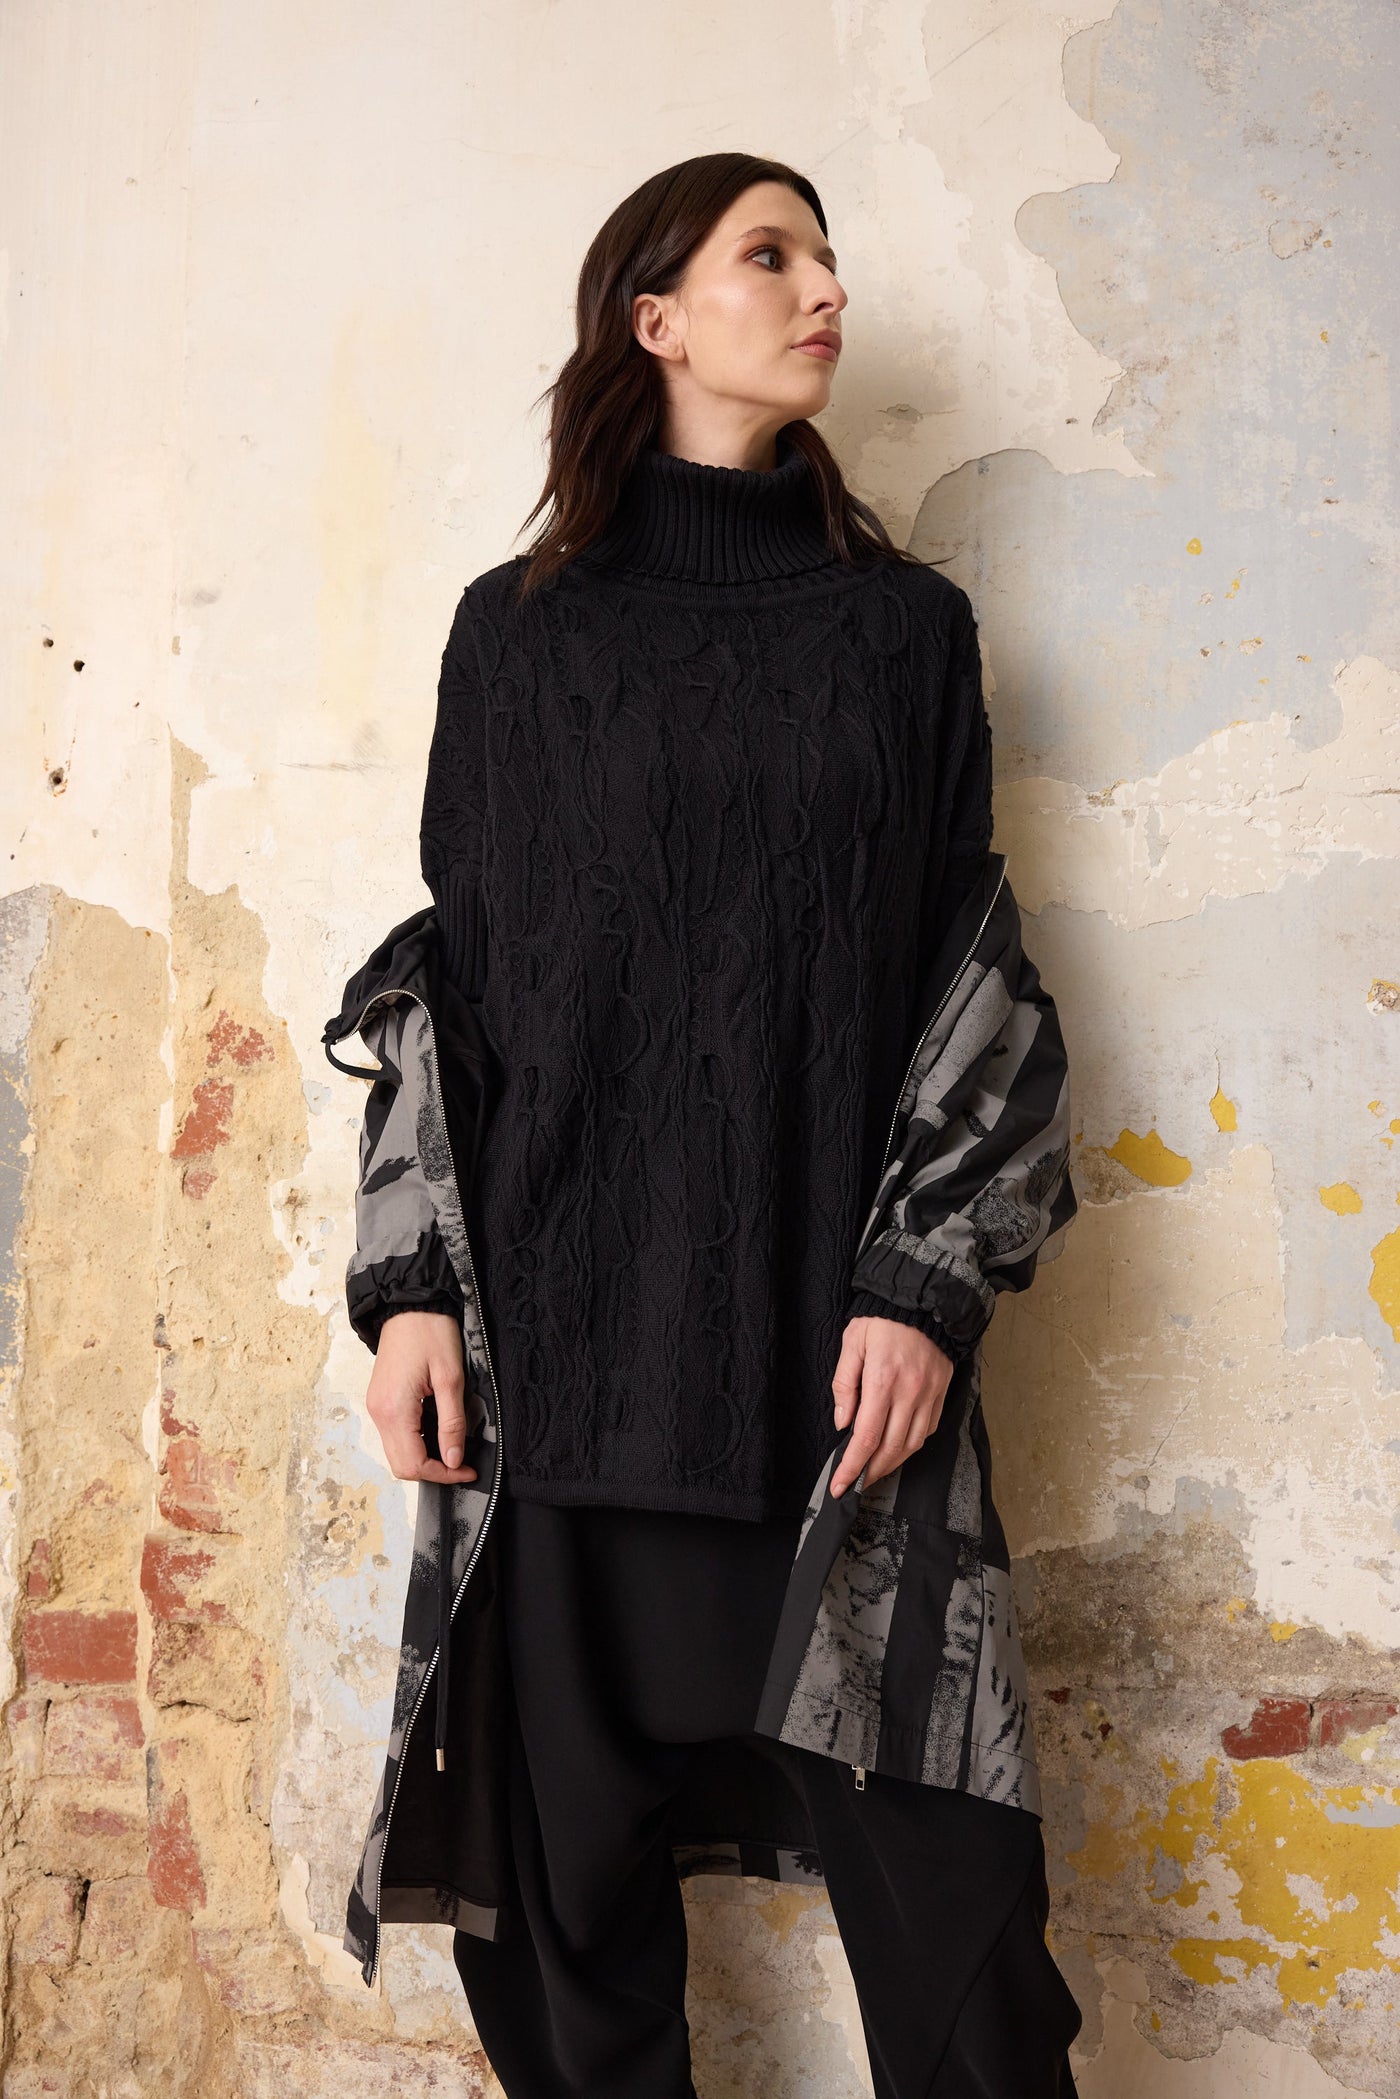 Vale and Ward - Quinn knit. Black